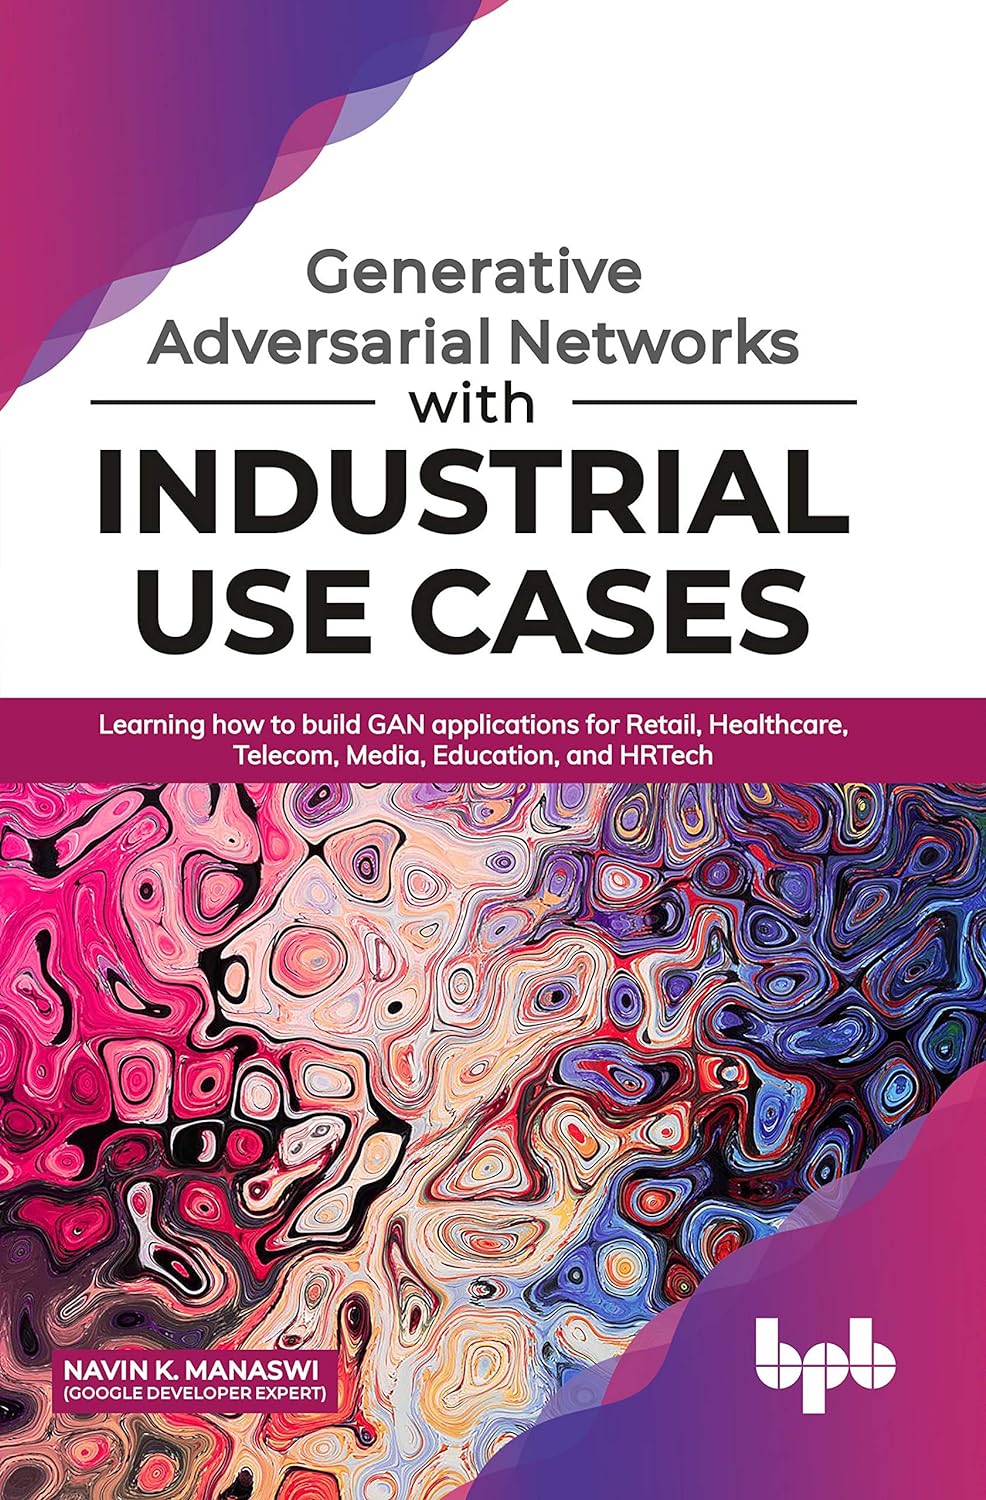 Generative Adversarial Networks with Industrial Use Cases: Learning How to Build GAN Applications for Retail, Healthcare, Telecom, Media, Education, and HRTech by Navin K. Manaswi 